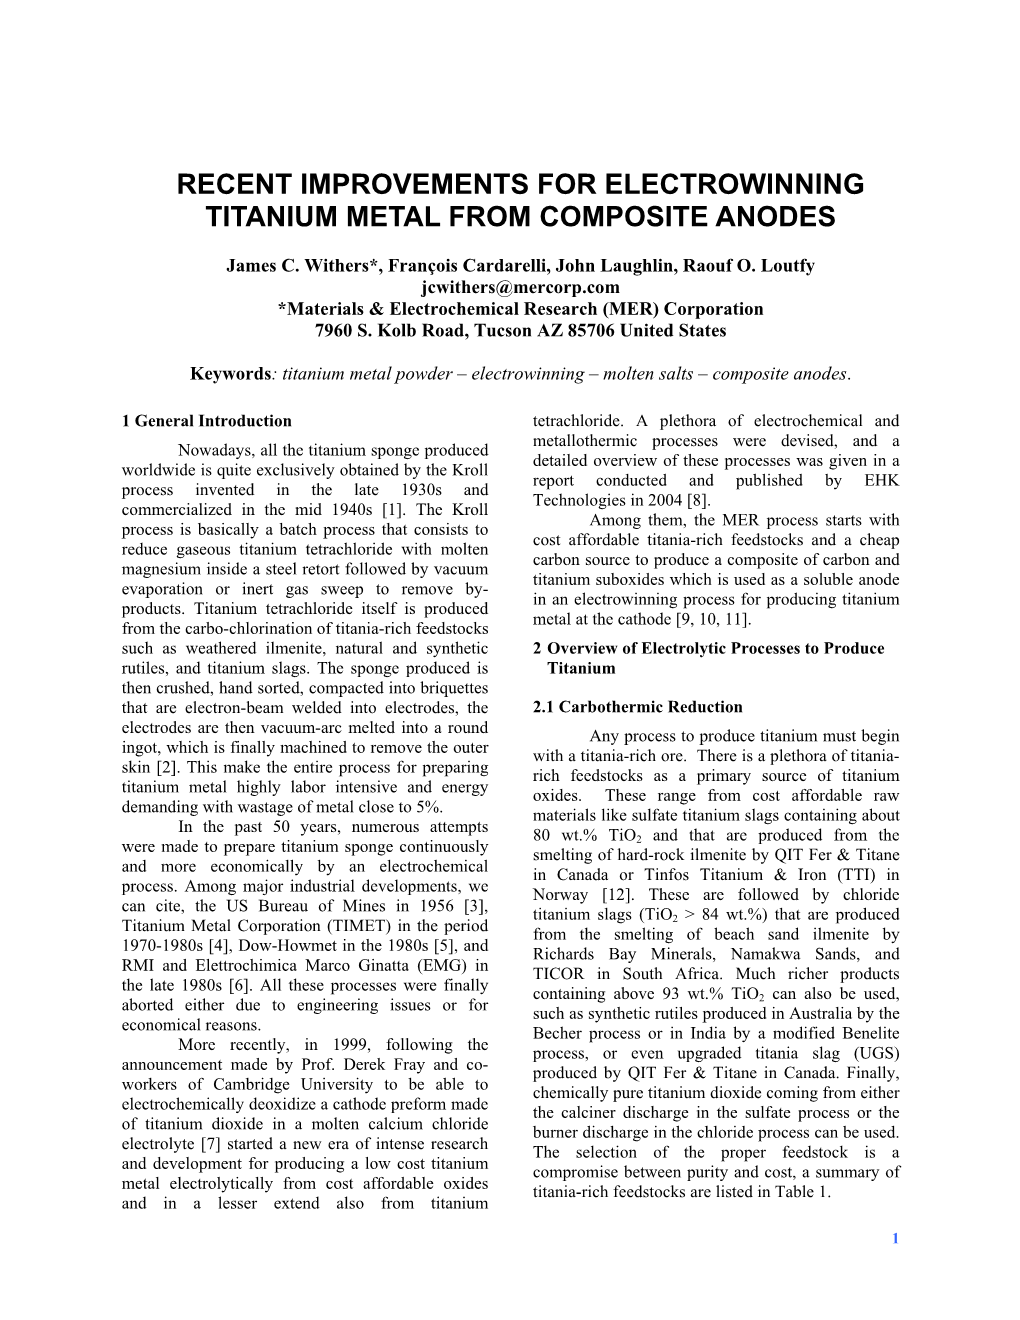 Electrowinning of Titanium Metal by the MER Process